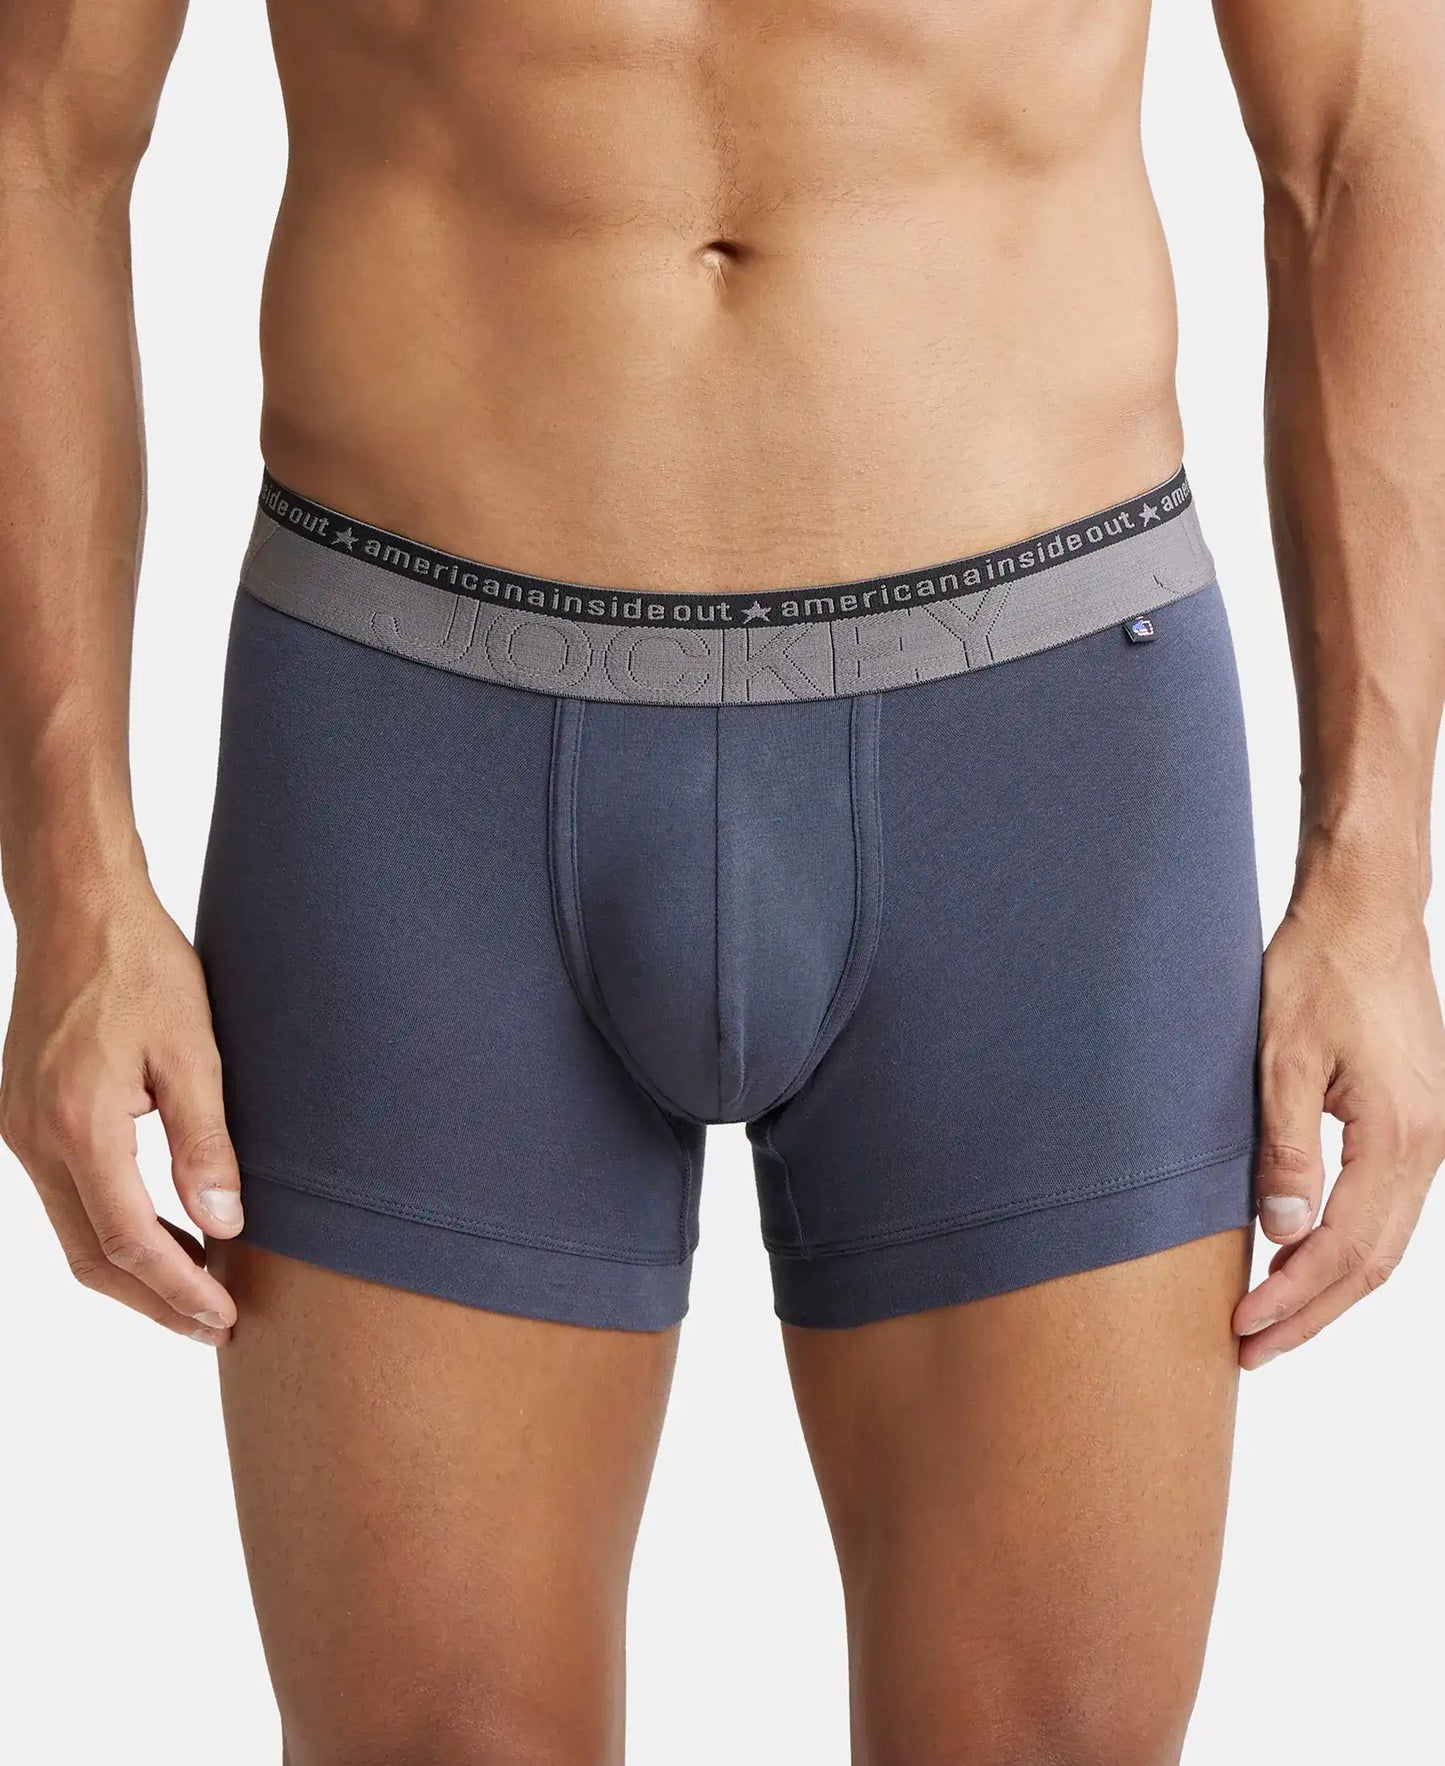 Super Combed Cotton Elastane Solid Trunk with Ultrasoft Waistband - Graphite-2